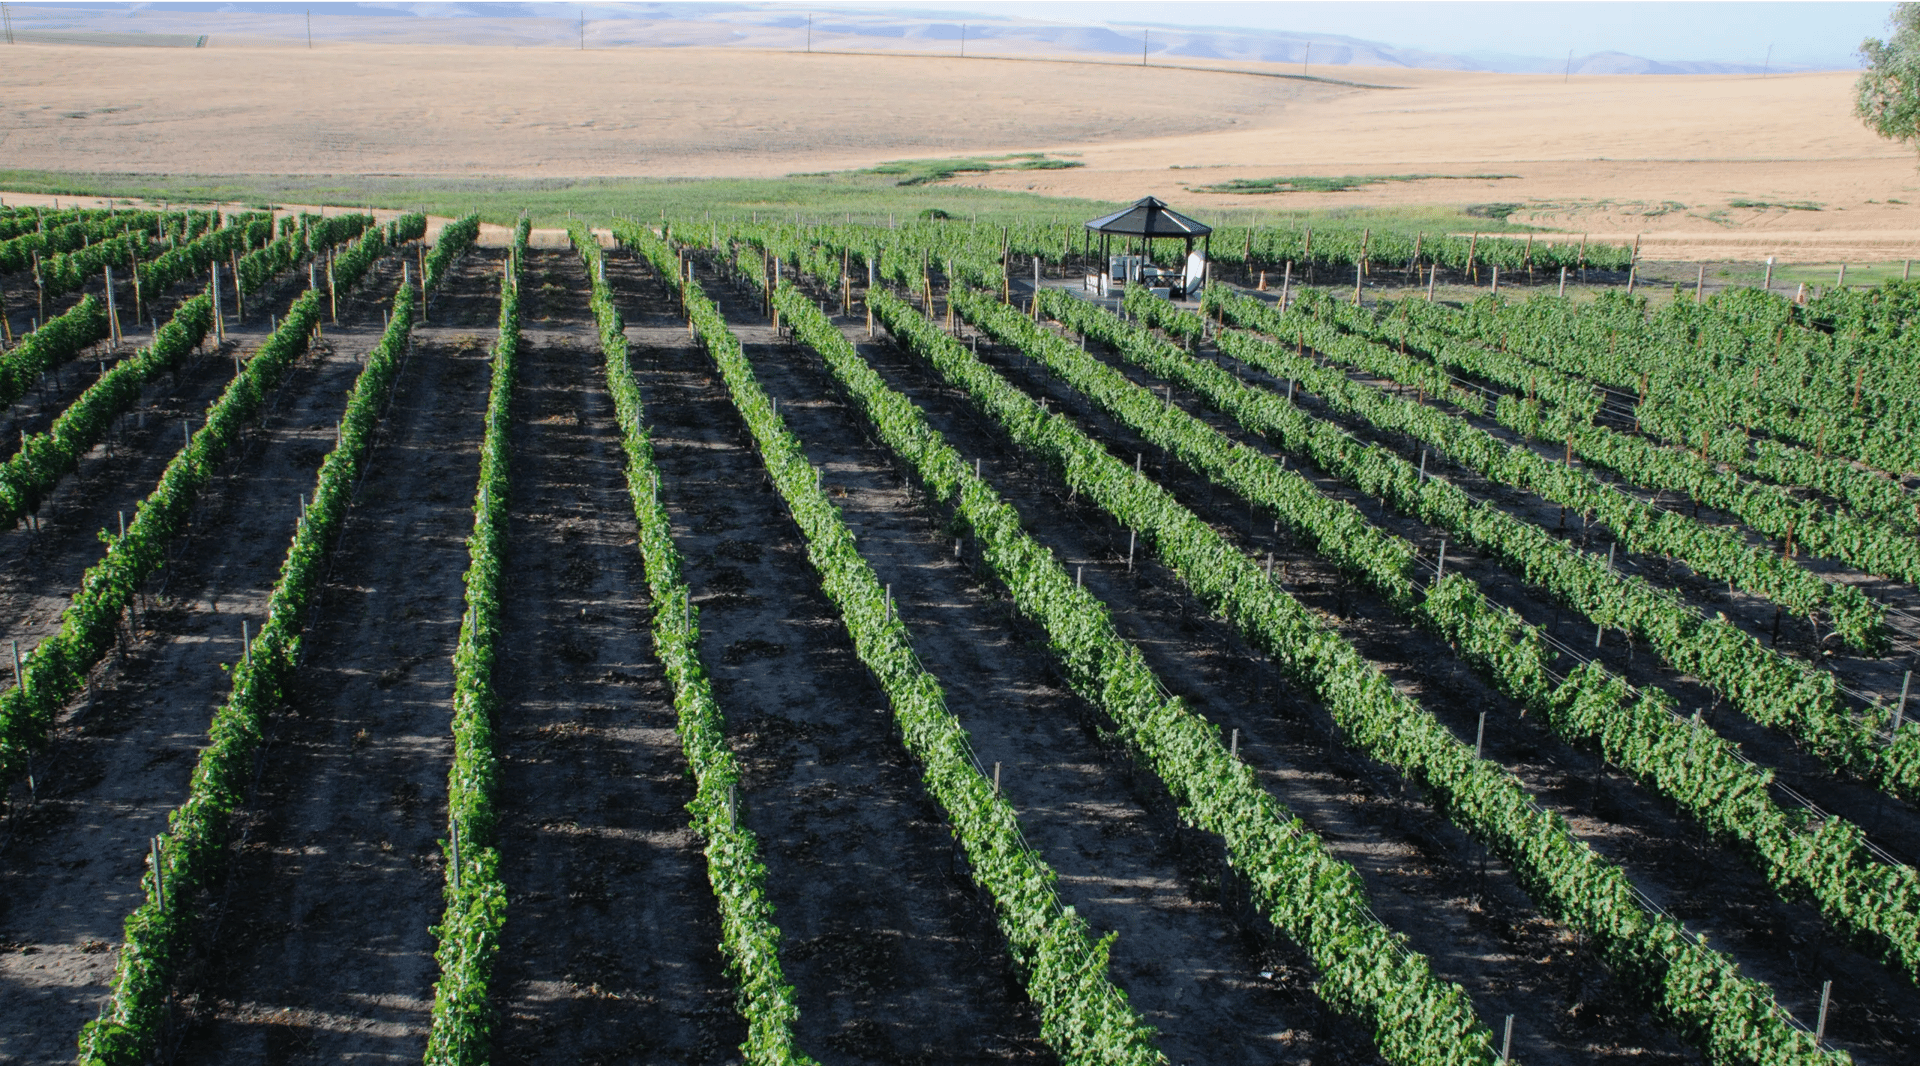 view of rows of grapevines with a gazebo and fields in the background